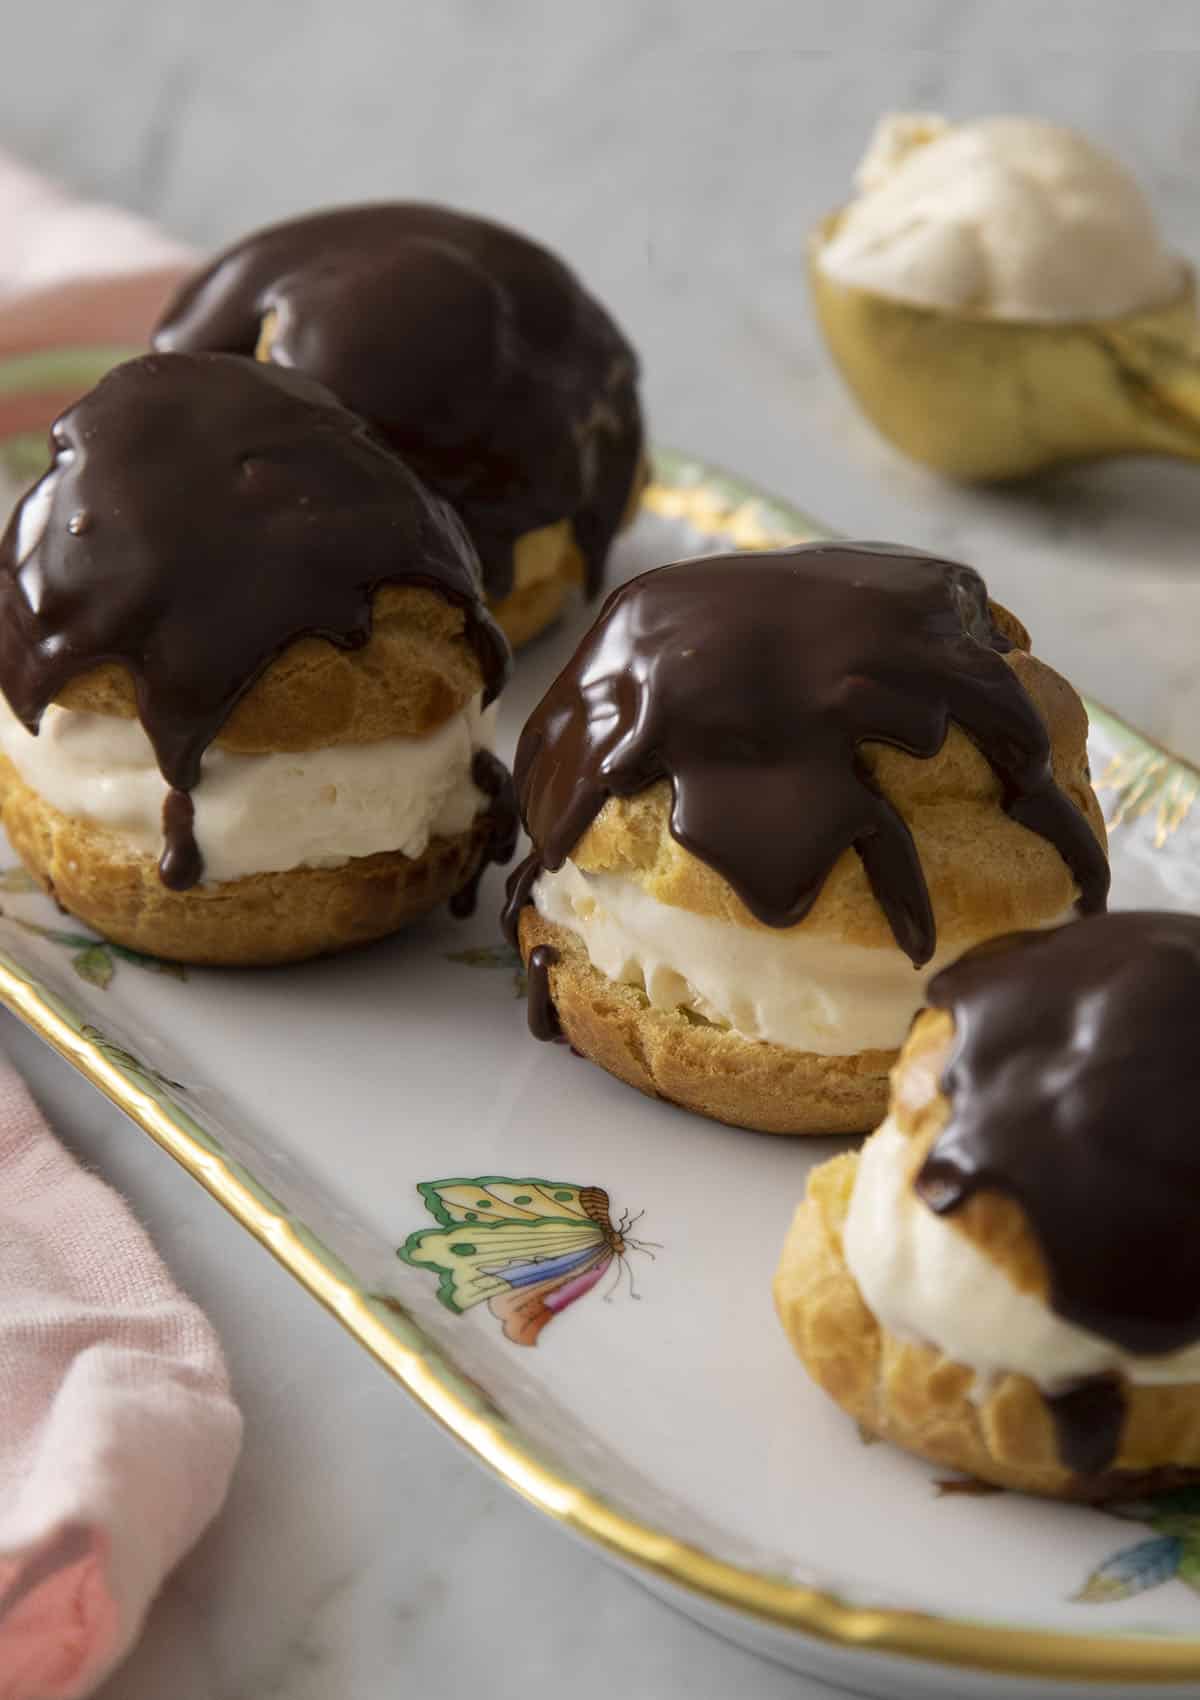 Four profiteroles topped with chocolate on an oval serving dish.